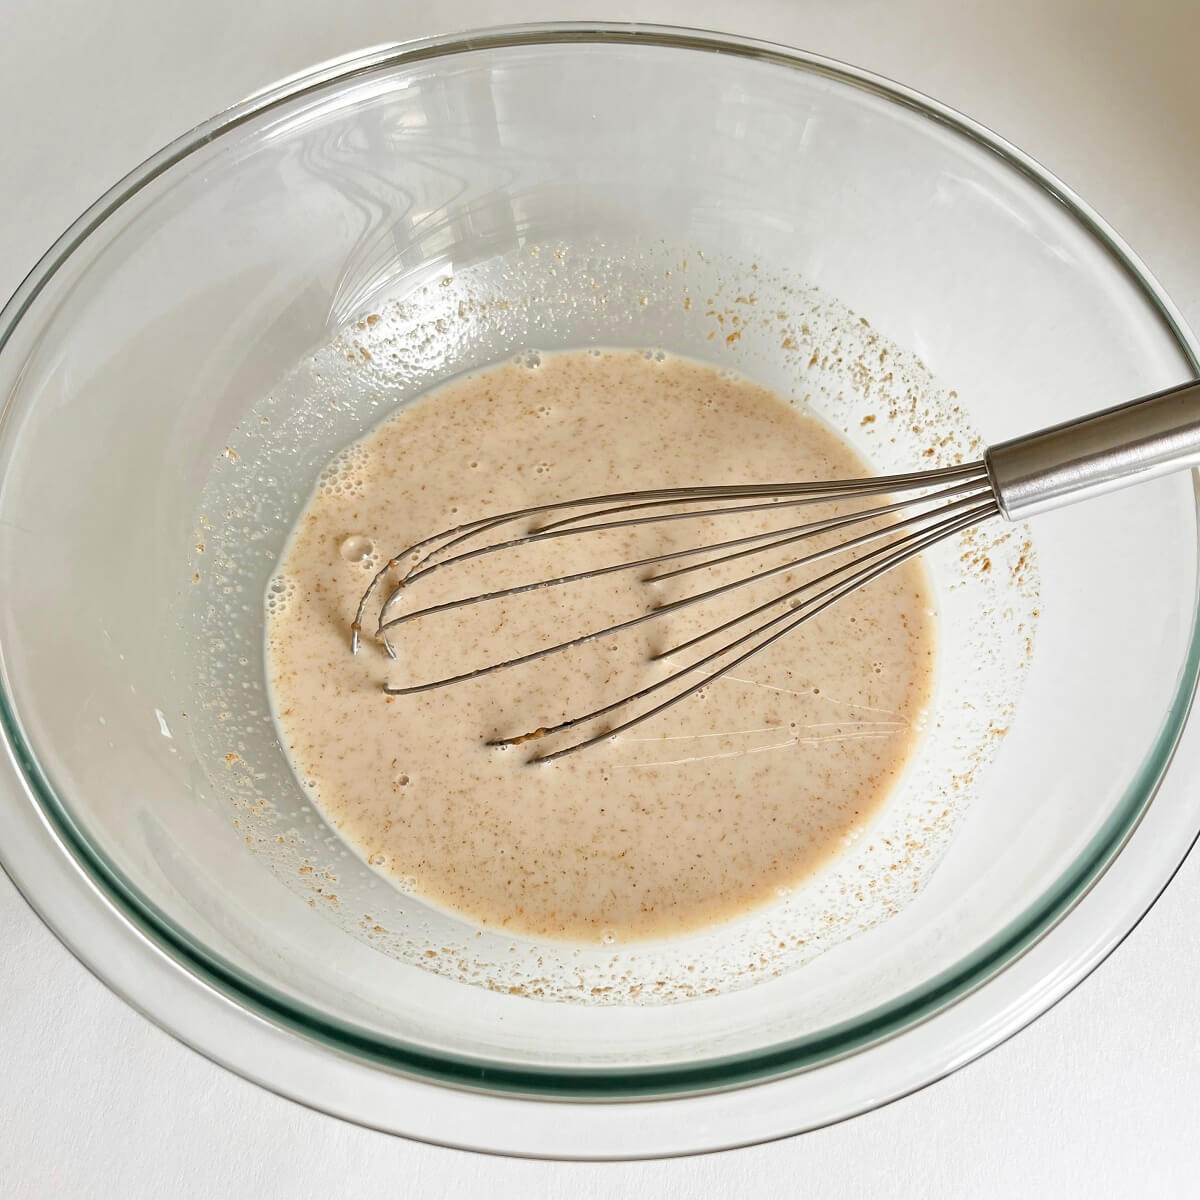 Wet ingredients for pancakes in a large glass mixing bowl with a whisk.